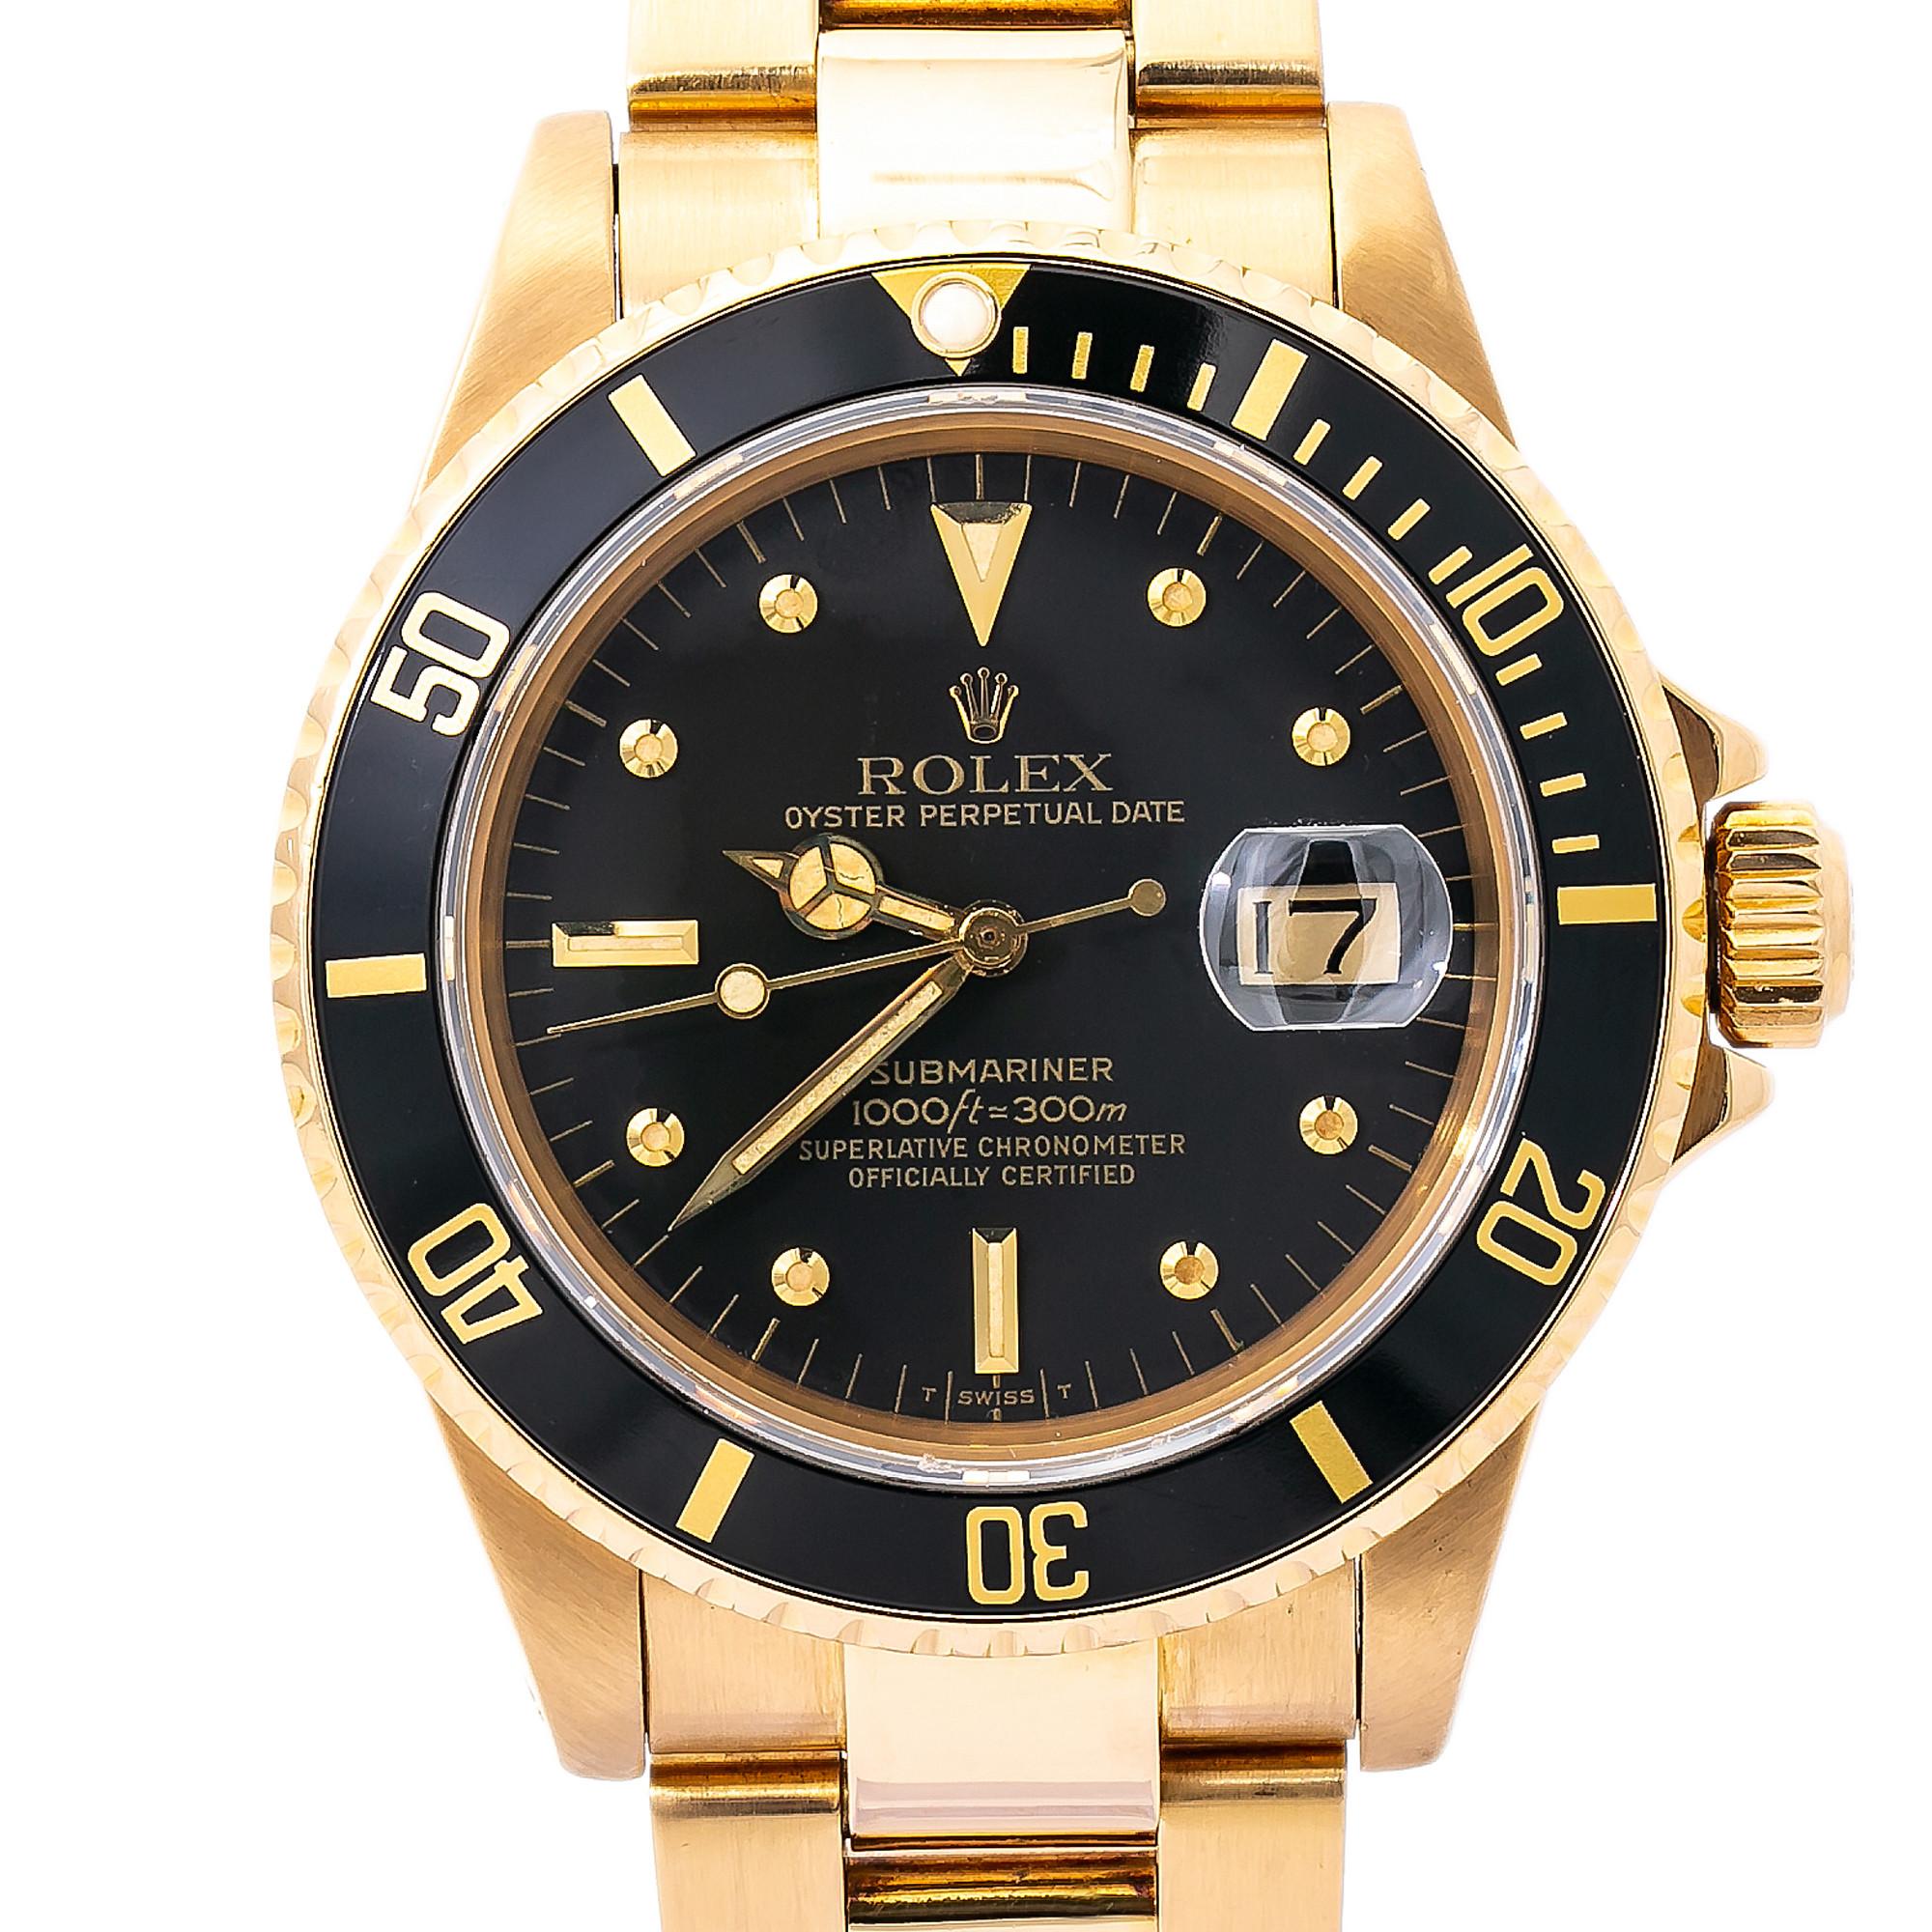 Rolex Submariner 16808, Black Dial, Certified and Warranty 1